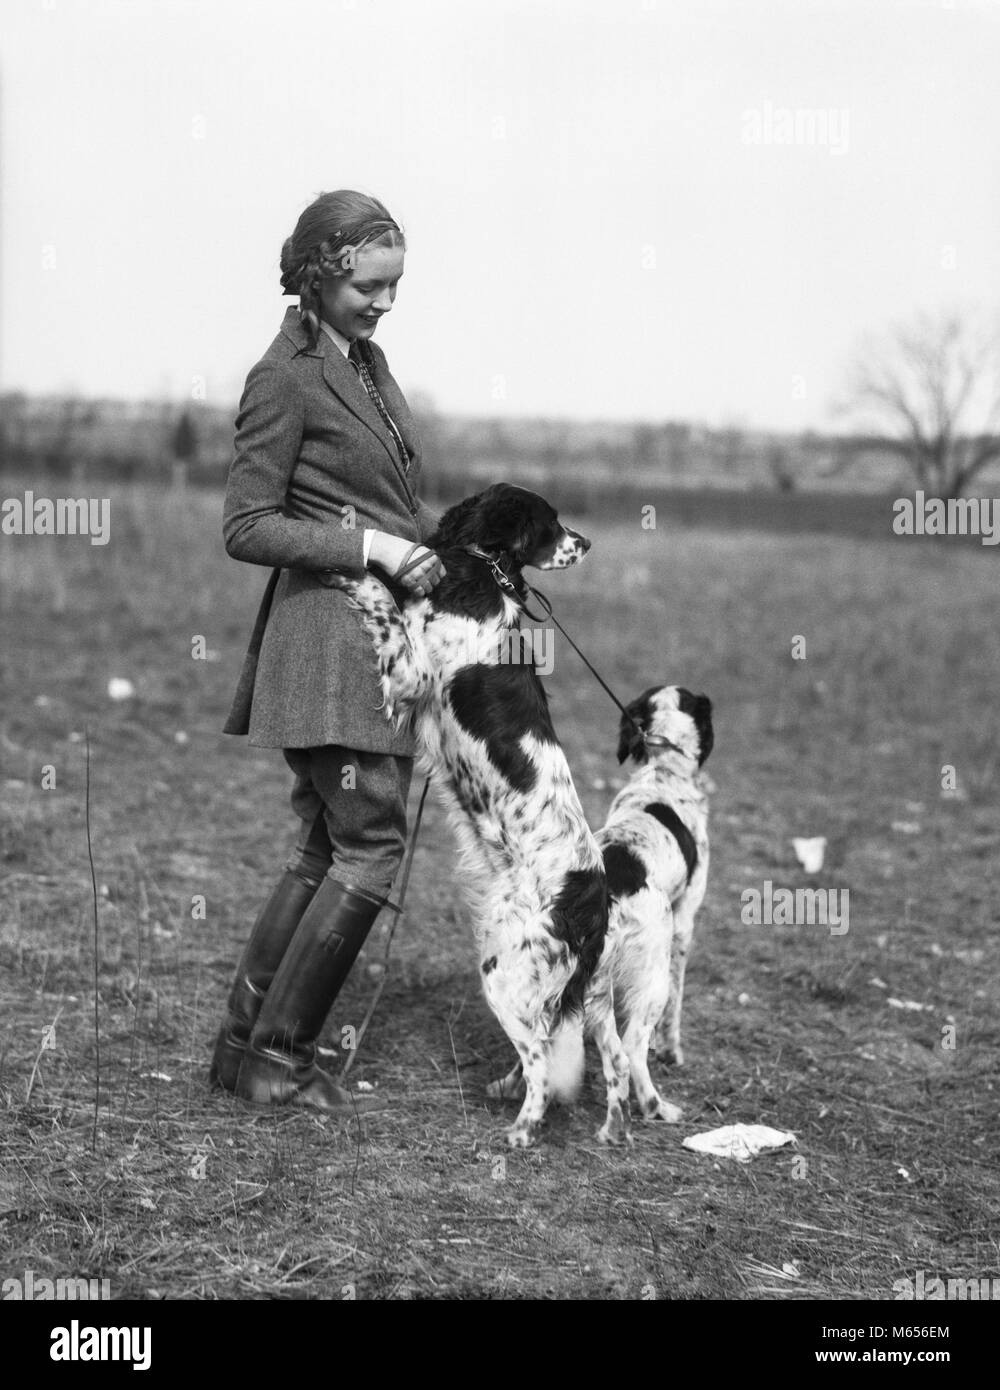 1920s SMILING WOMAN WEARING WOOL COAT JODHPURS LEATHER BOOTS STANDING PLAYING WITH TWO ENGLISH SETTER DOGS - d3309 HAR001 HARS ONE PERSON ONLY LUXURY WOOL COPY SPACE FRIENDSHIP FULL-LENGTH LADIES ANIMALS HUNTER ENGLISH NOSTALGIA TOGETHERNESS 20-25 YEARS HAPPINESS TWO ANIMALS MAMMALS STYLES CANINES 18-19 YEARS FALL SEASON SMILES SPOTS CONNECTION JOYFUL FASHIONS COOPERATION SPOTTED CANINE HIND HUNTING DOGS HUNTRESS JODHPURS MAMMAL SETTER YOUNG ADULT WOMAN B&W BLACK AND WHITE CAUCASIAN ETHNICITY OLD FASHIONED PERSONS Stock Photo